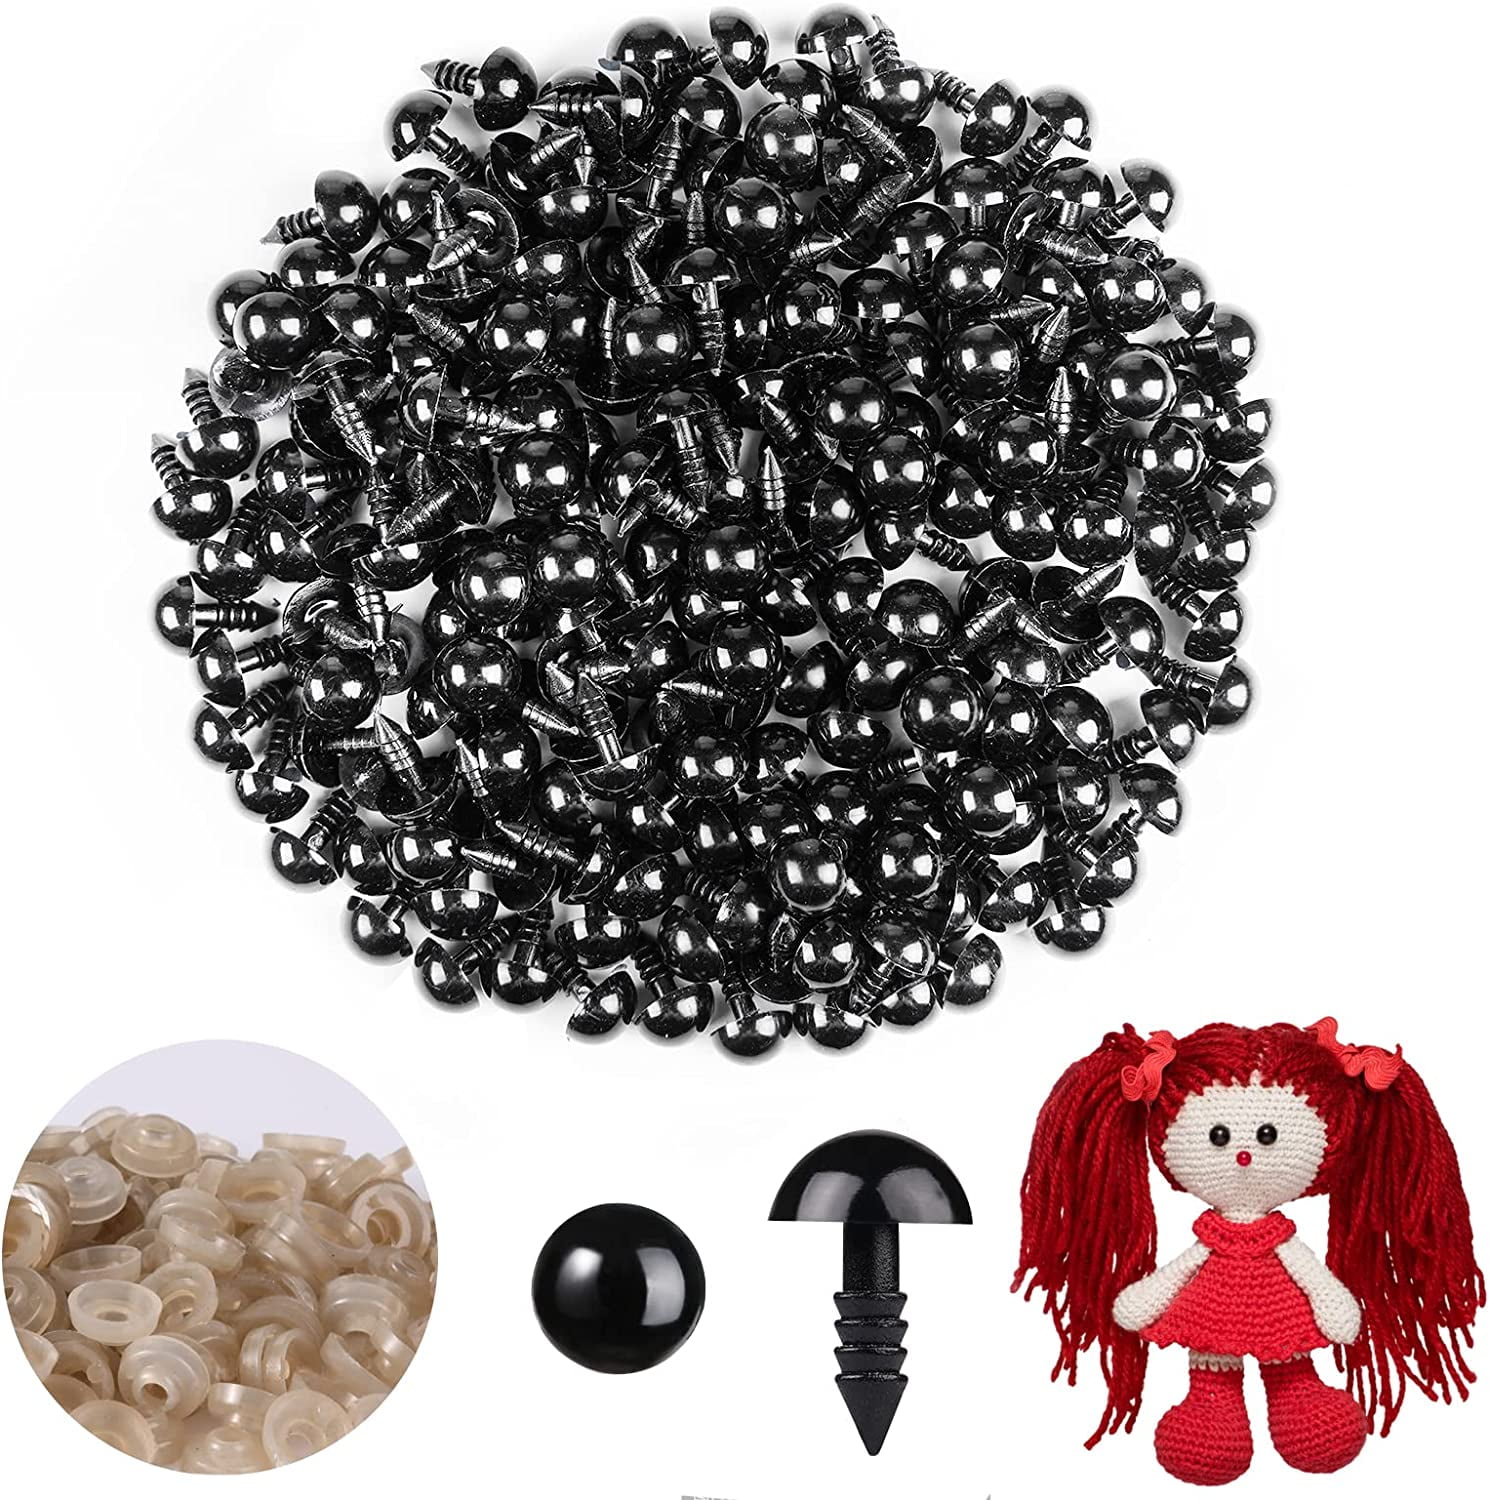 ARTCXC 560Pieces 6-14mm Safety Eyes and Noses Set with Washers for Crafts,Black and Colorful Plastic Safety Eyes Craft Crochet Eyes for DIY Doll and